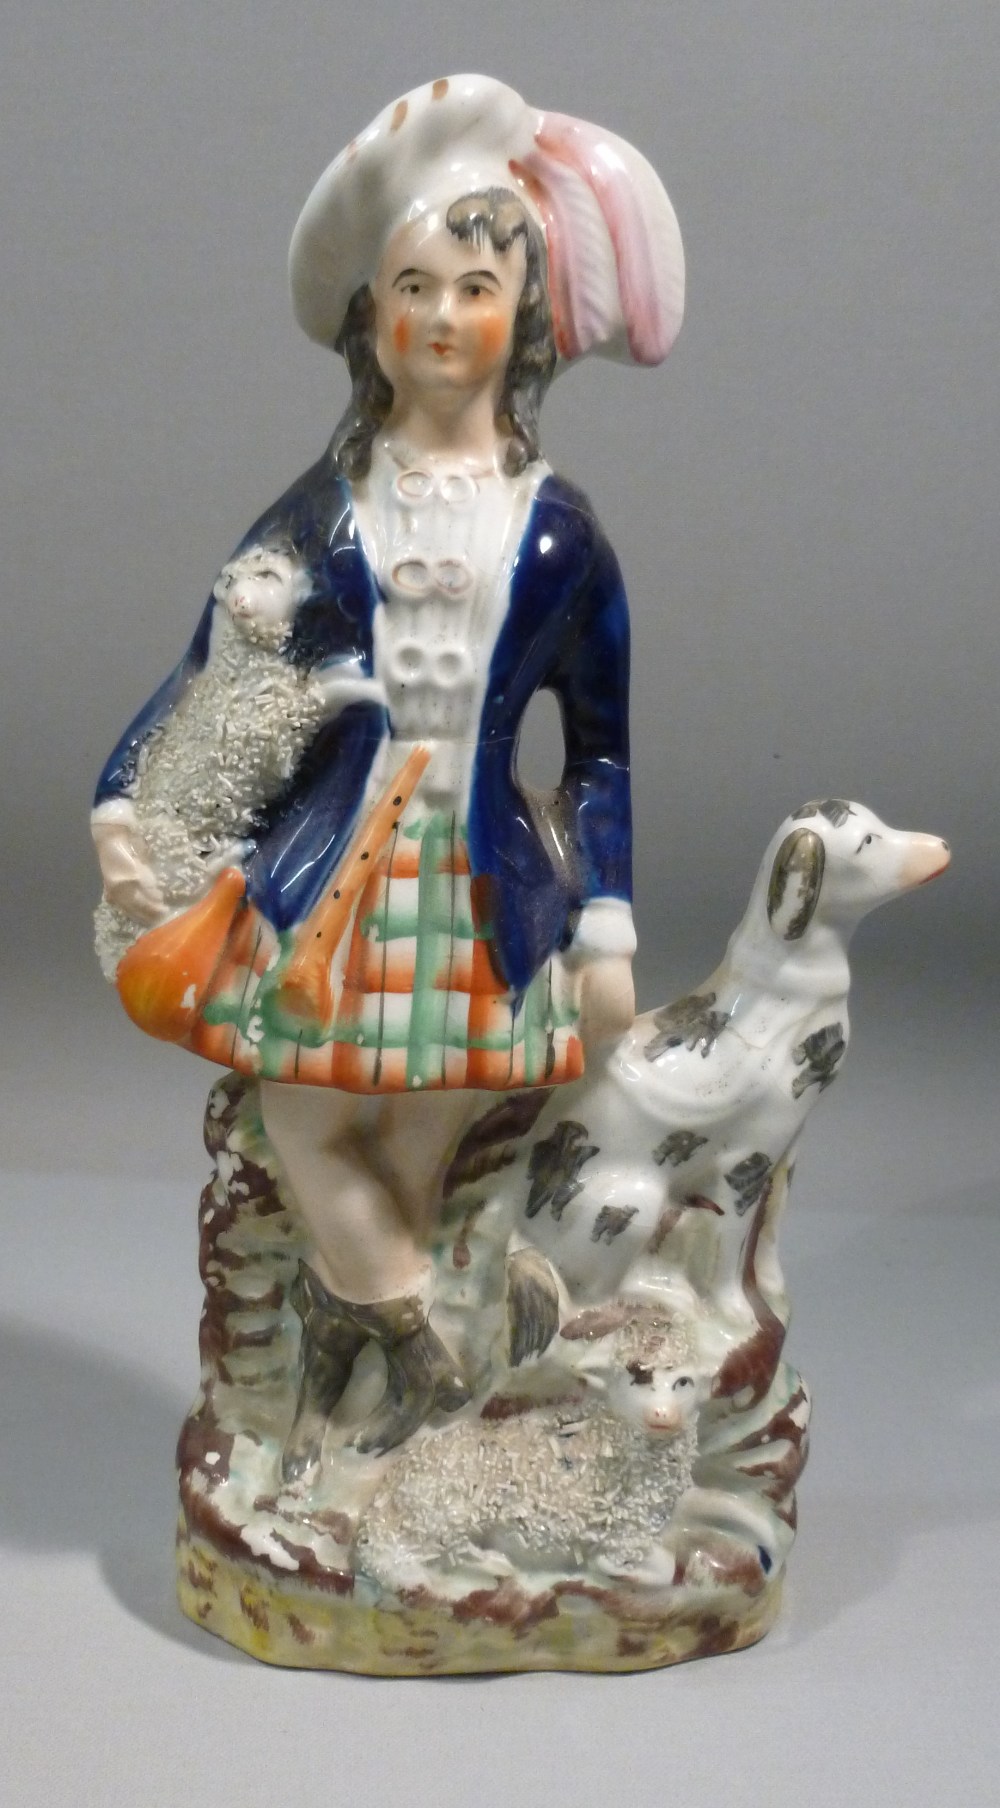 ROYAL DOULTON CHARACTER JUG FROM WILLIAMSBURG BOOTMAKER D6572 COPYRIGHT 1962 (H: 19 cm), A SMALL - Image 3 of 8